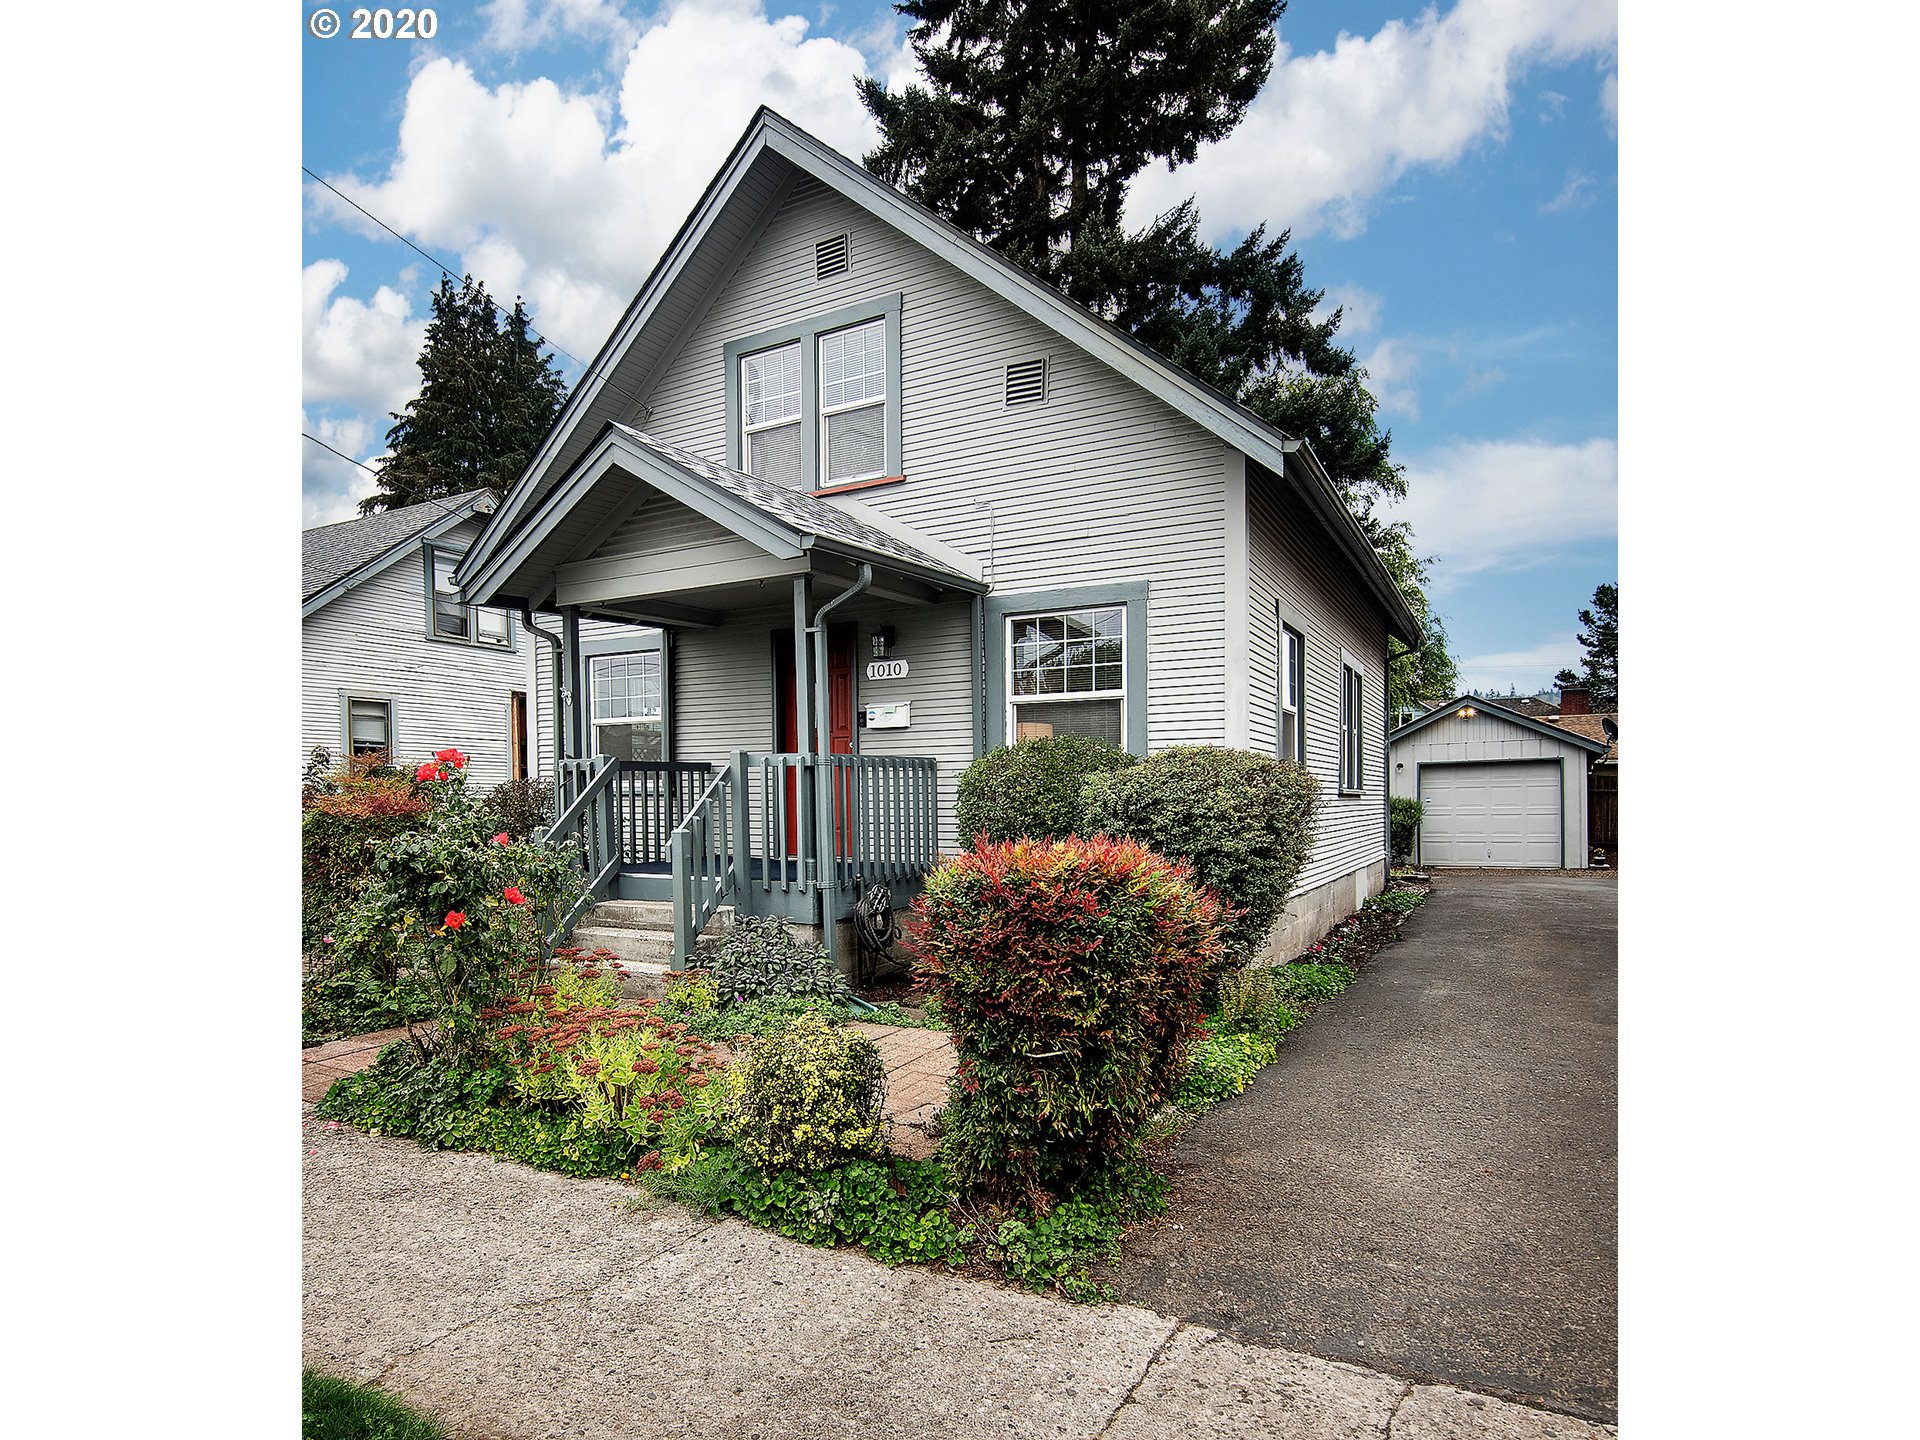 1010 S 6TH AVE (1 of 25)